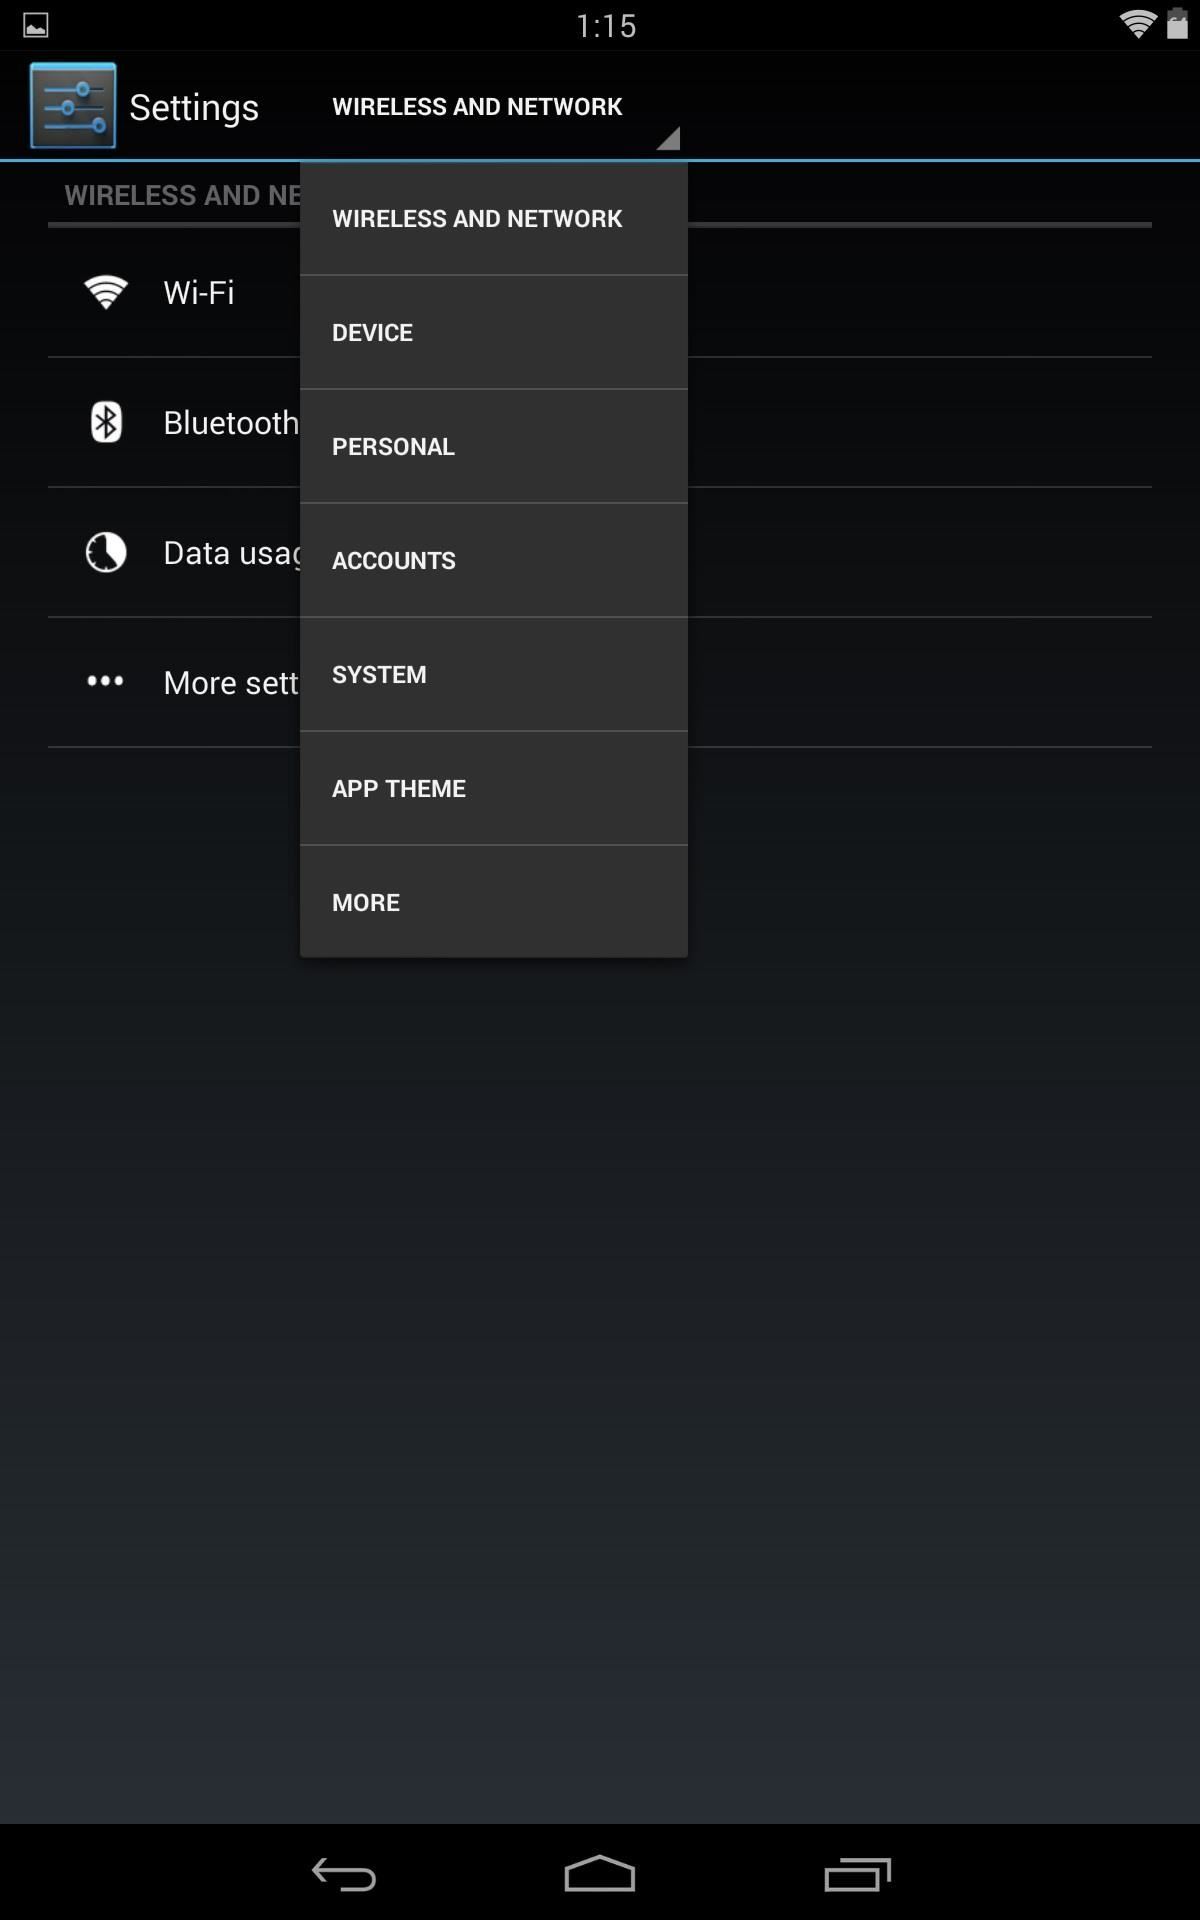 How to Separate the Settings Menu on Your Nexus 7 Tablet into Tabs Arranged by Category